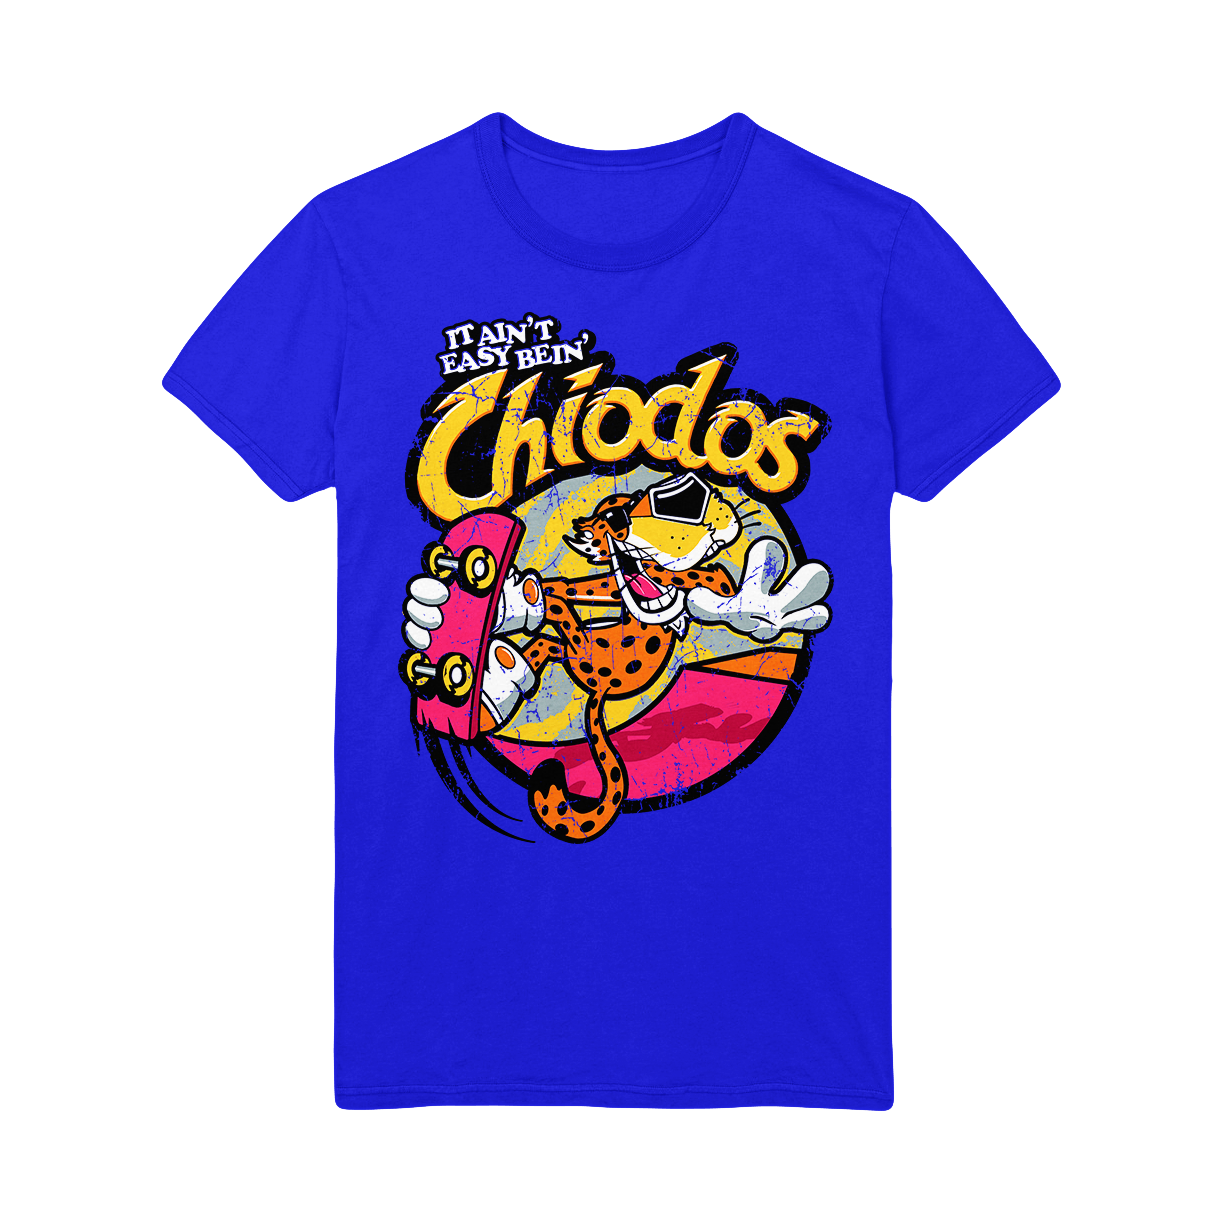 image of a royal blue tee shirt on a white background. front of tee has center print that says it ain't easy bein' chiodos. an image of a the cheetos cheetah mascot on a skateboard is in the center